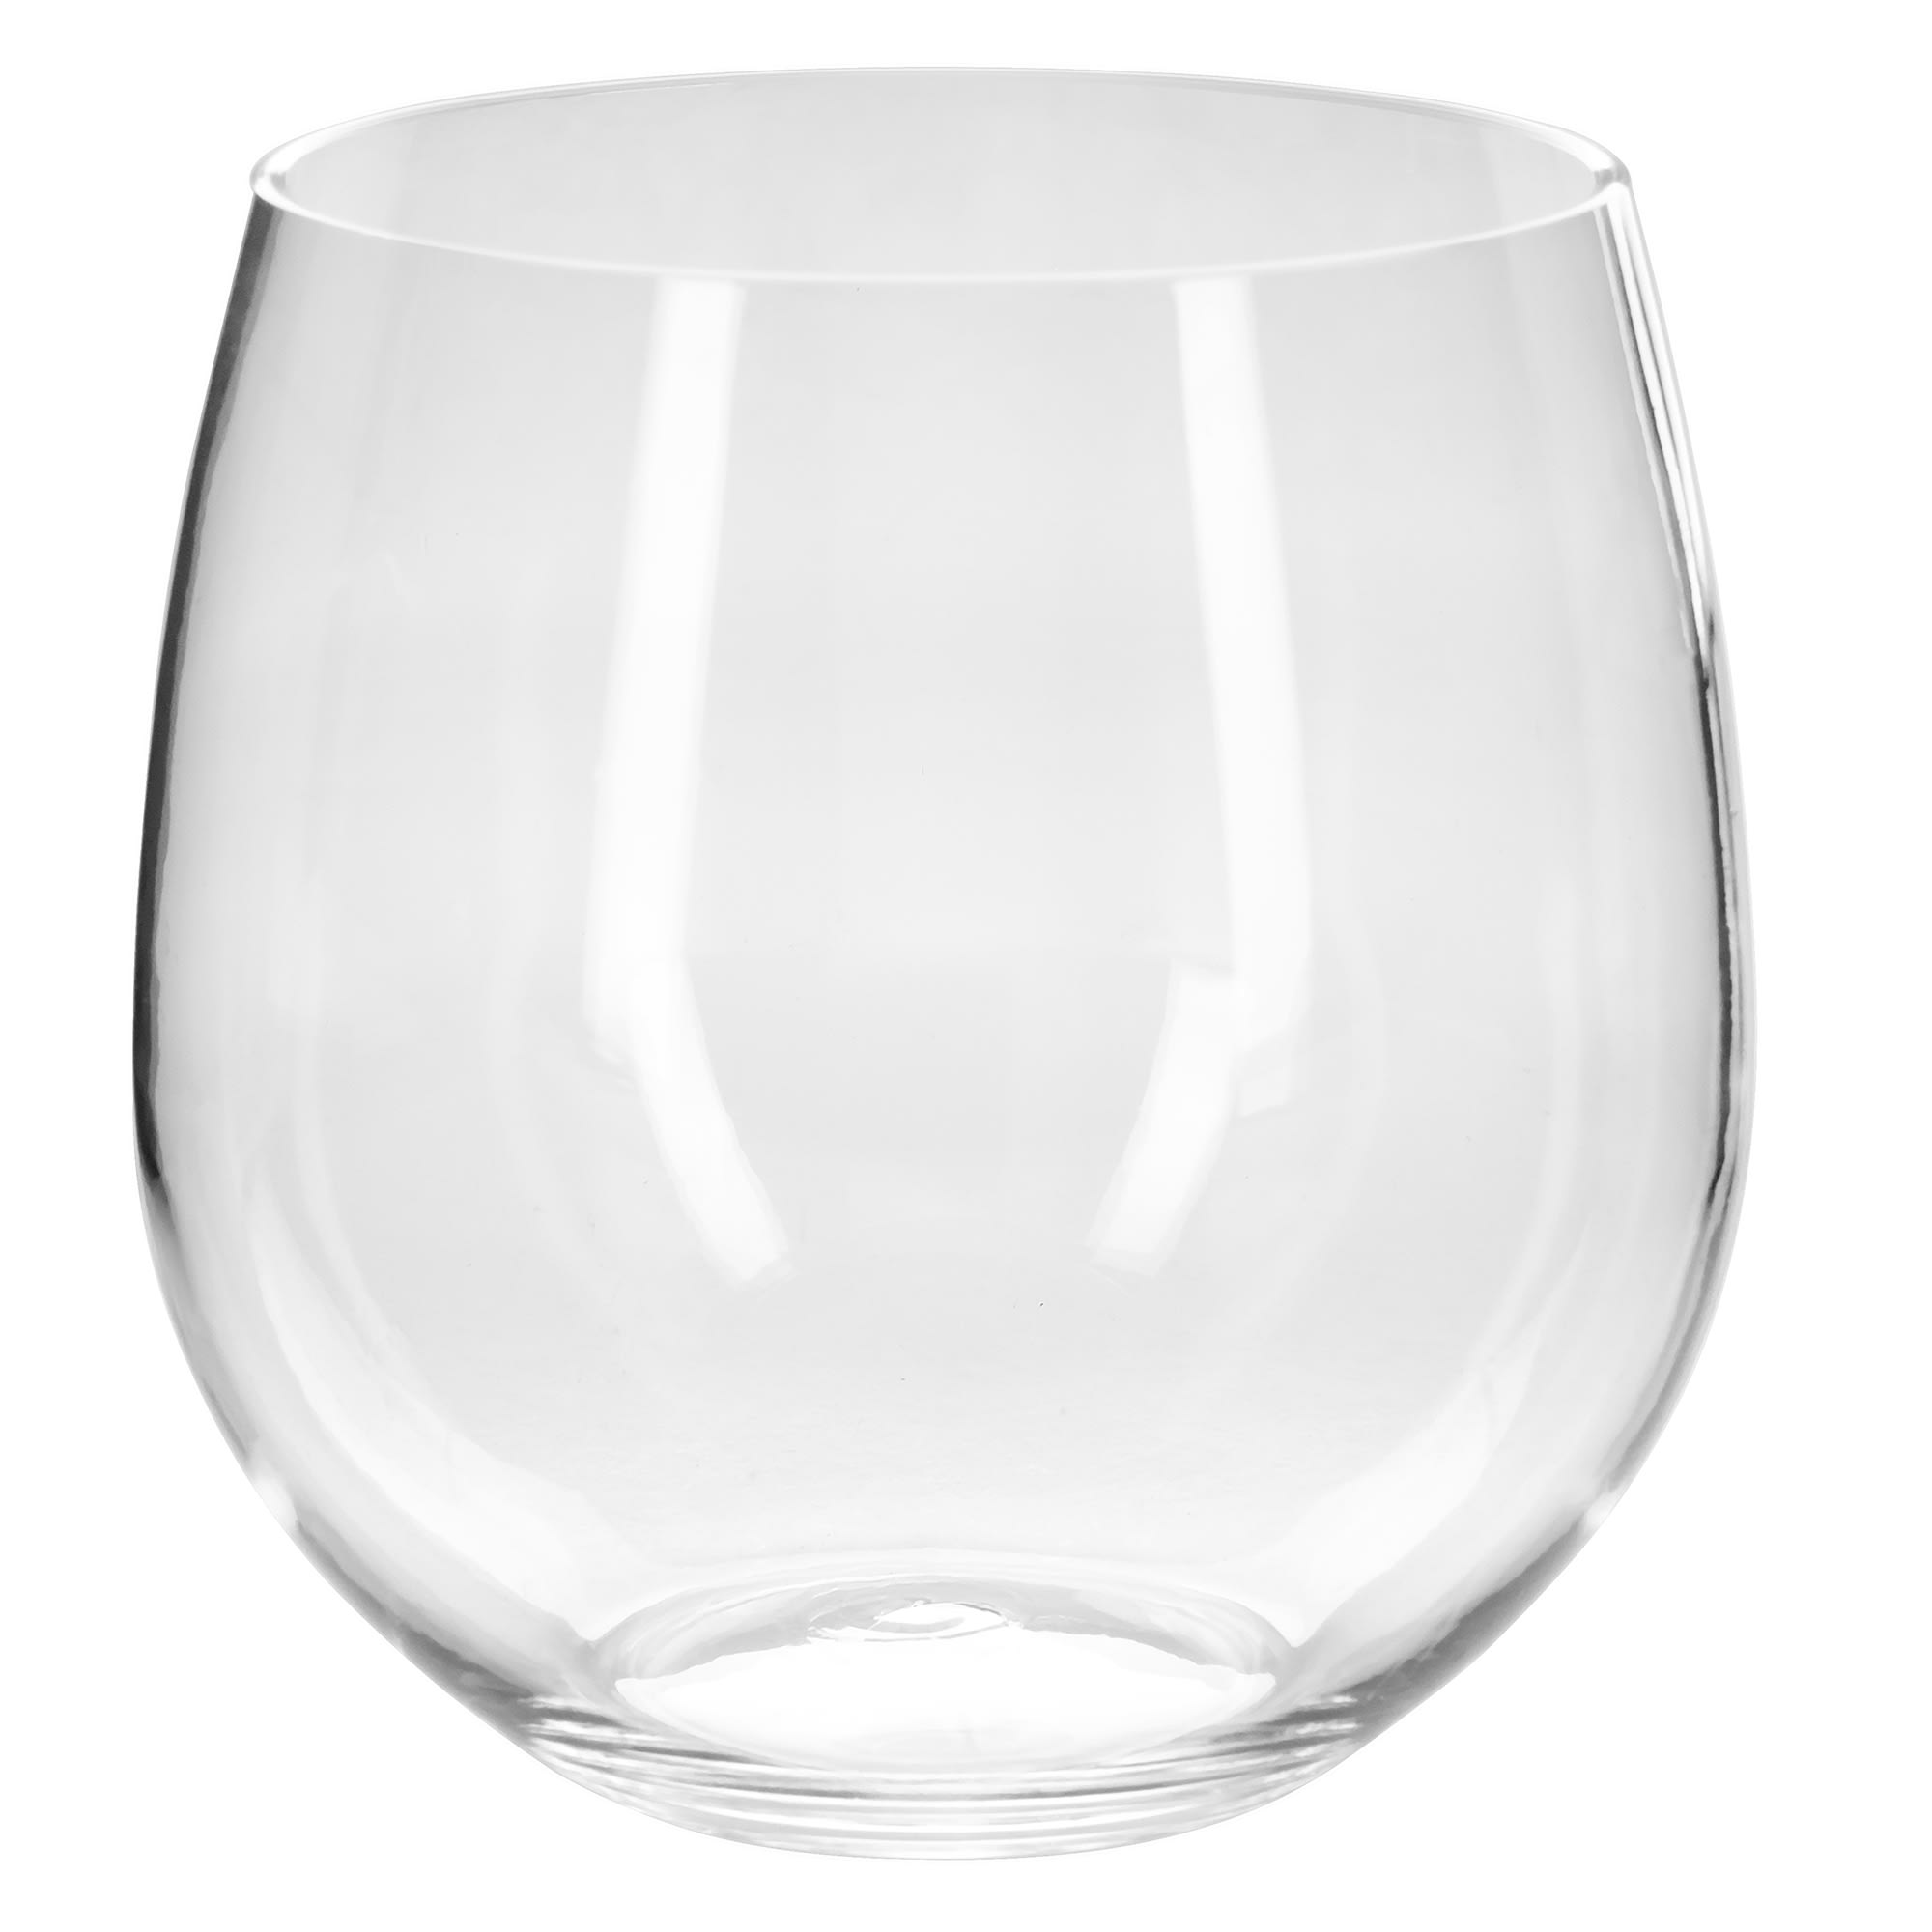 Libbey Stemless Red Wine Glasses, 16.75-ounce, Set of